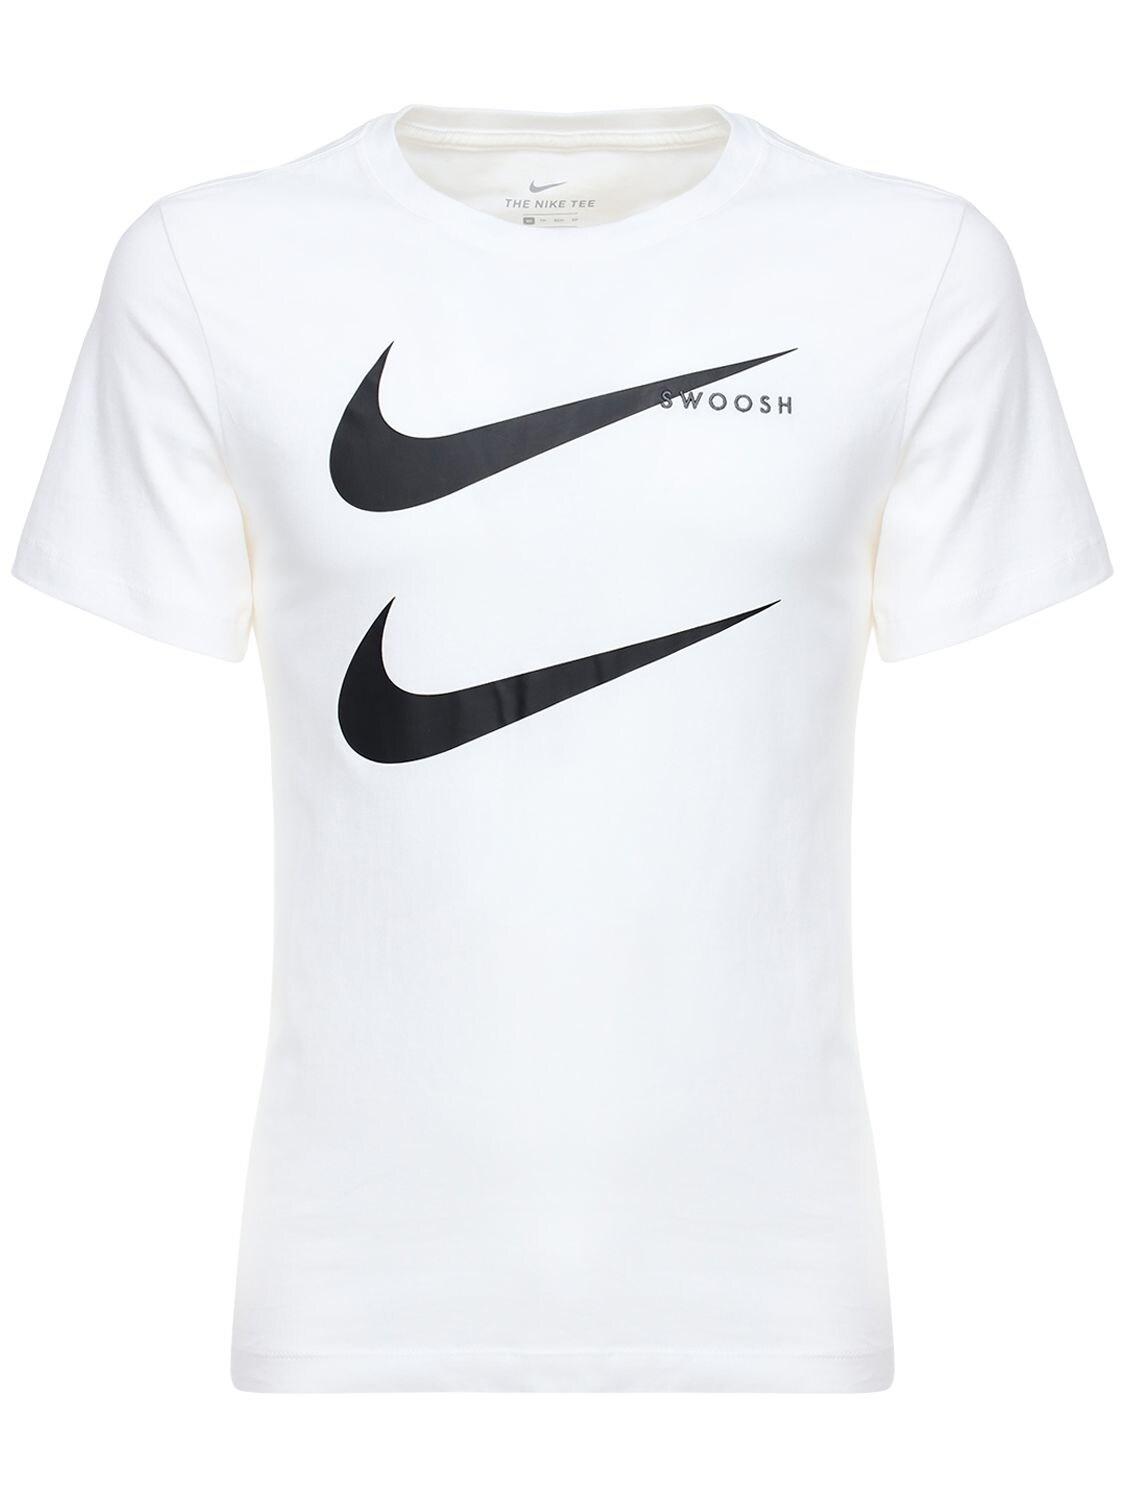 Nike Double Swoosh Cotton T-shirt in White for Men | Lyst UK